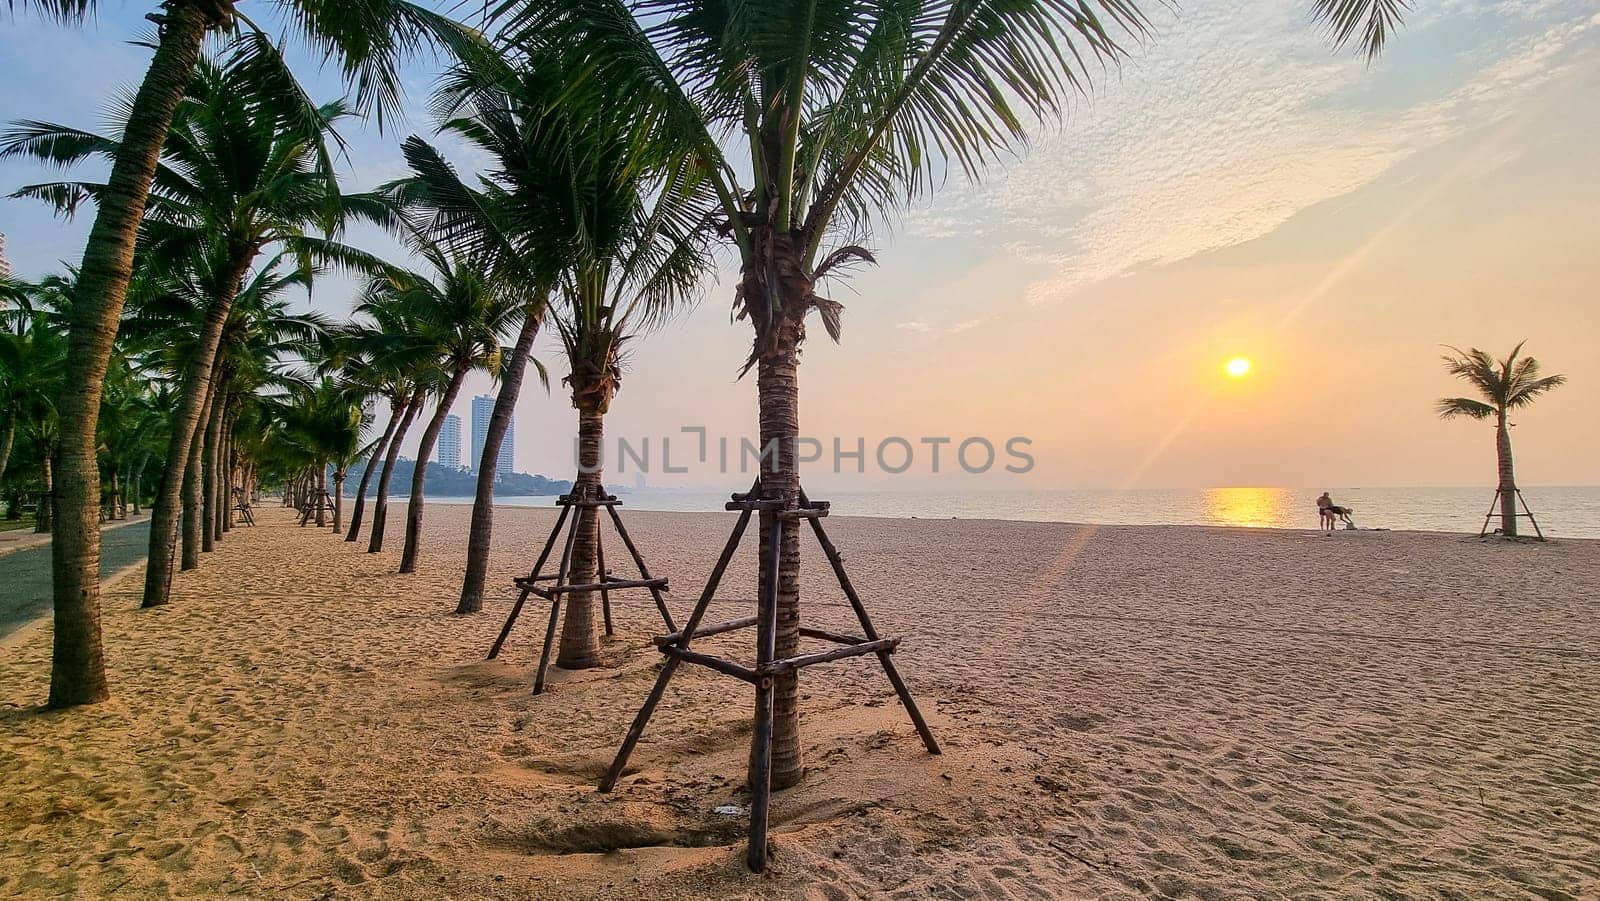 A serene beach scene with tall palm trees swaying in the breeze against a colorful sunset backdrop by fokkebok